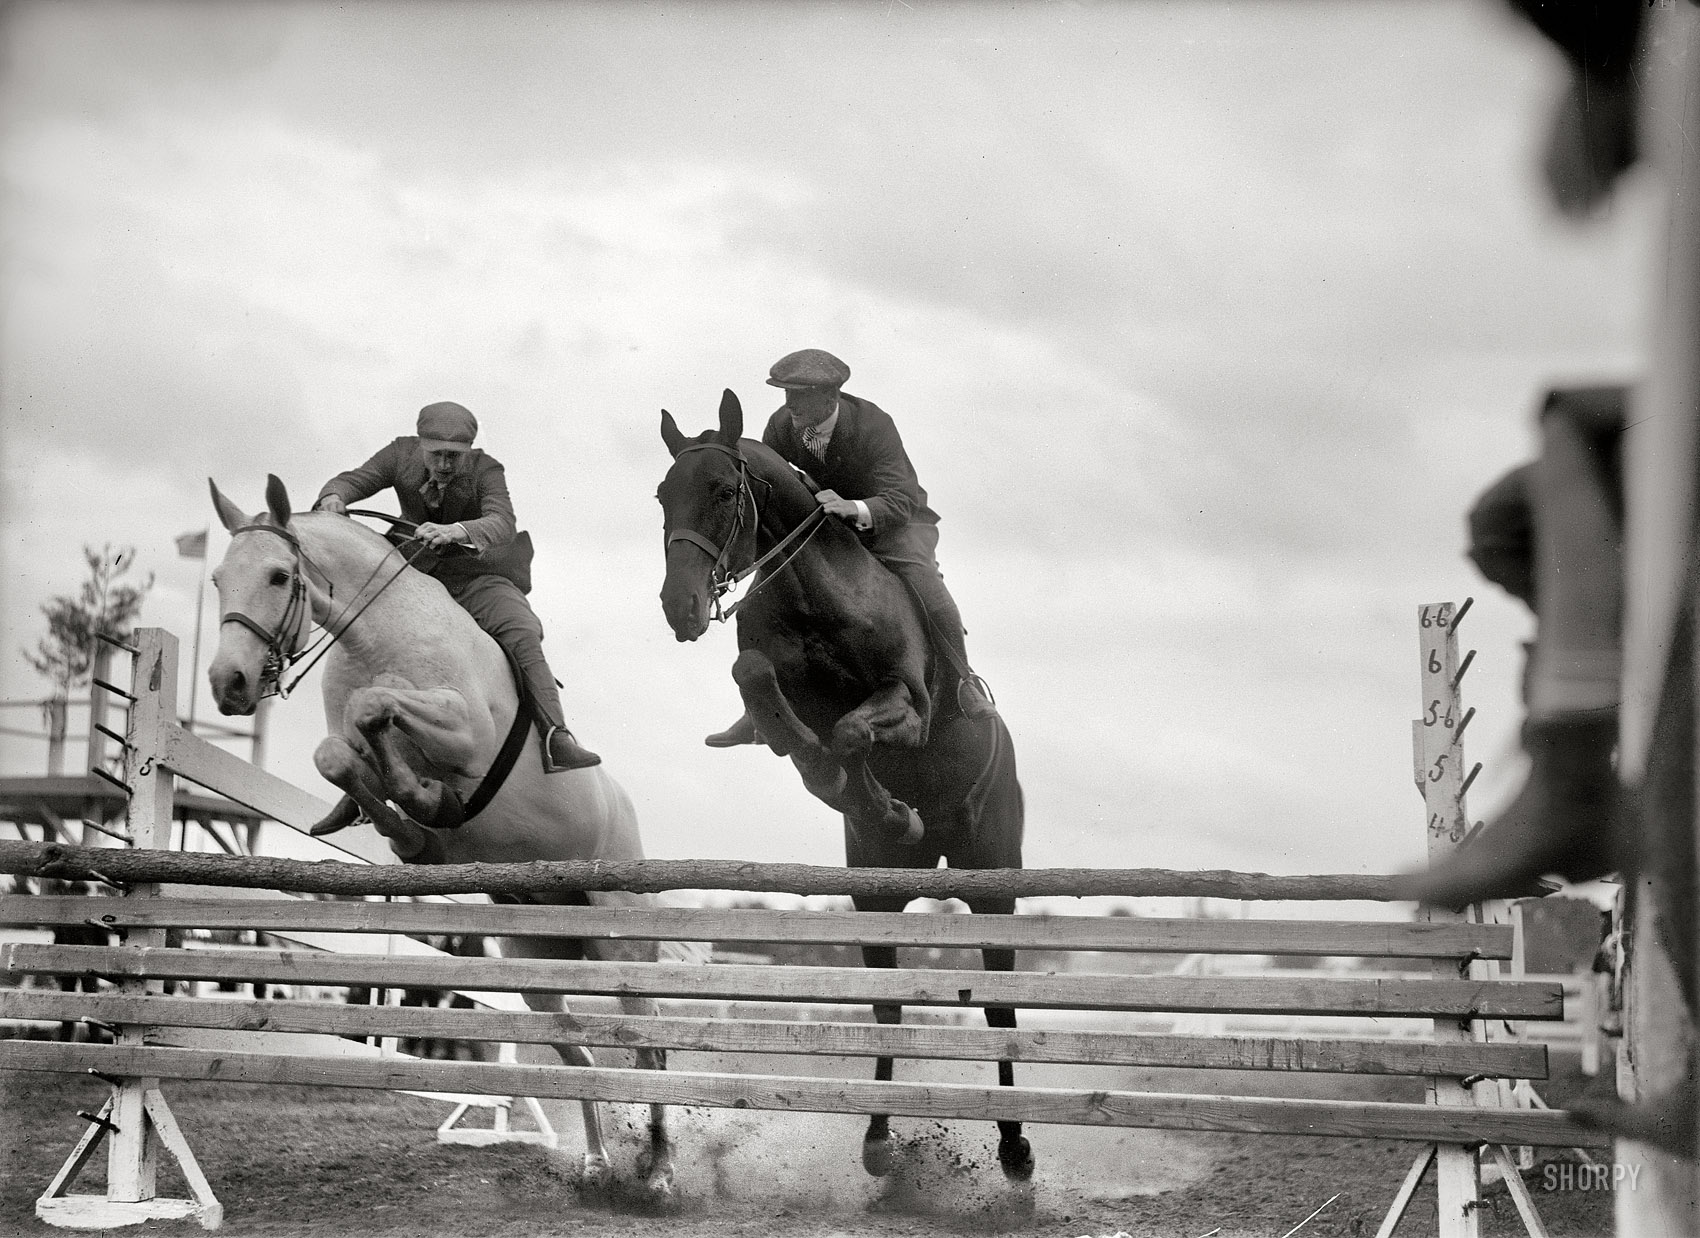 Washington, D.C., or vicinity. "Horse shows, miscellaneous, 1919. Unidentified jumpers." Harris & Ewing Collection glass negative. View full size.